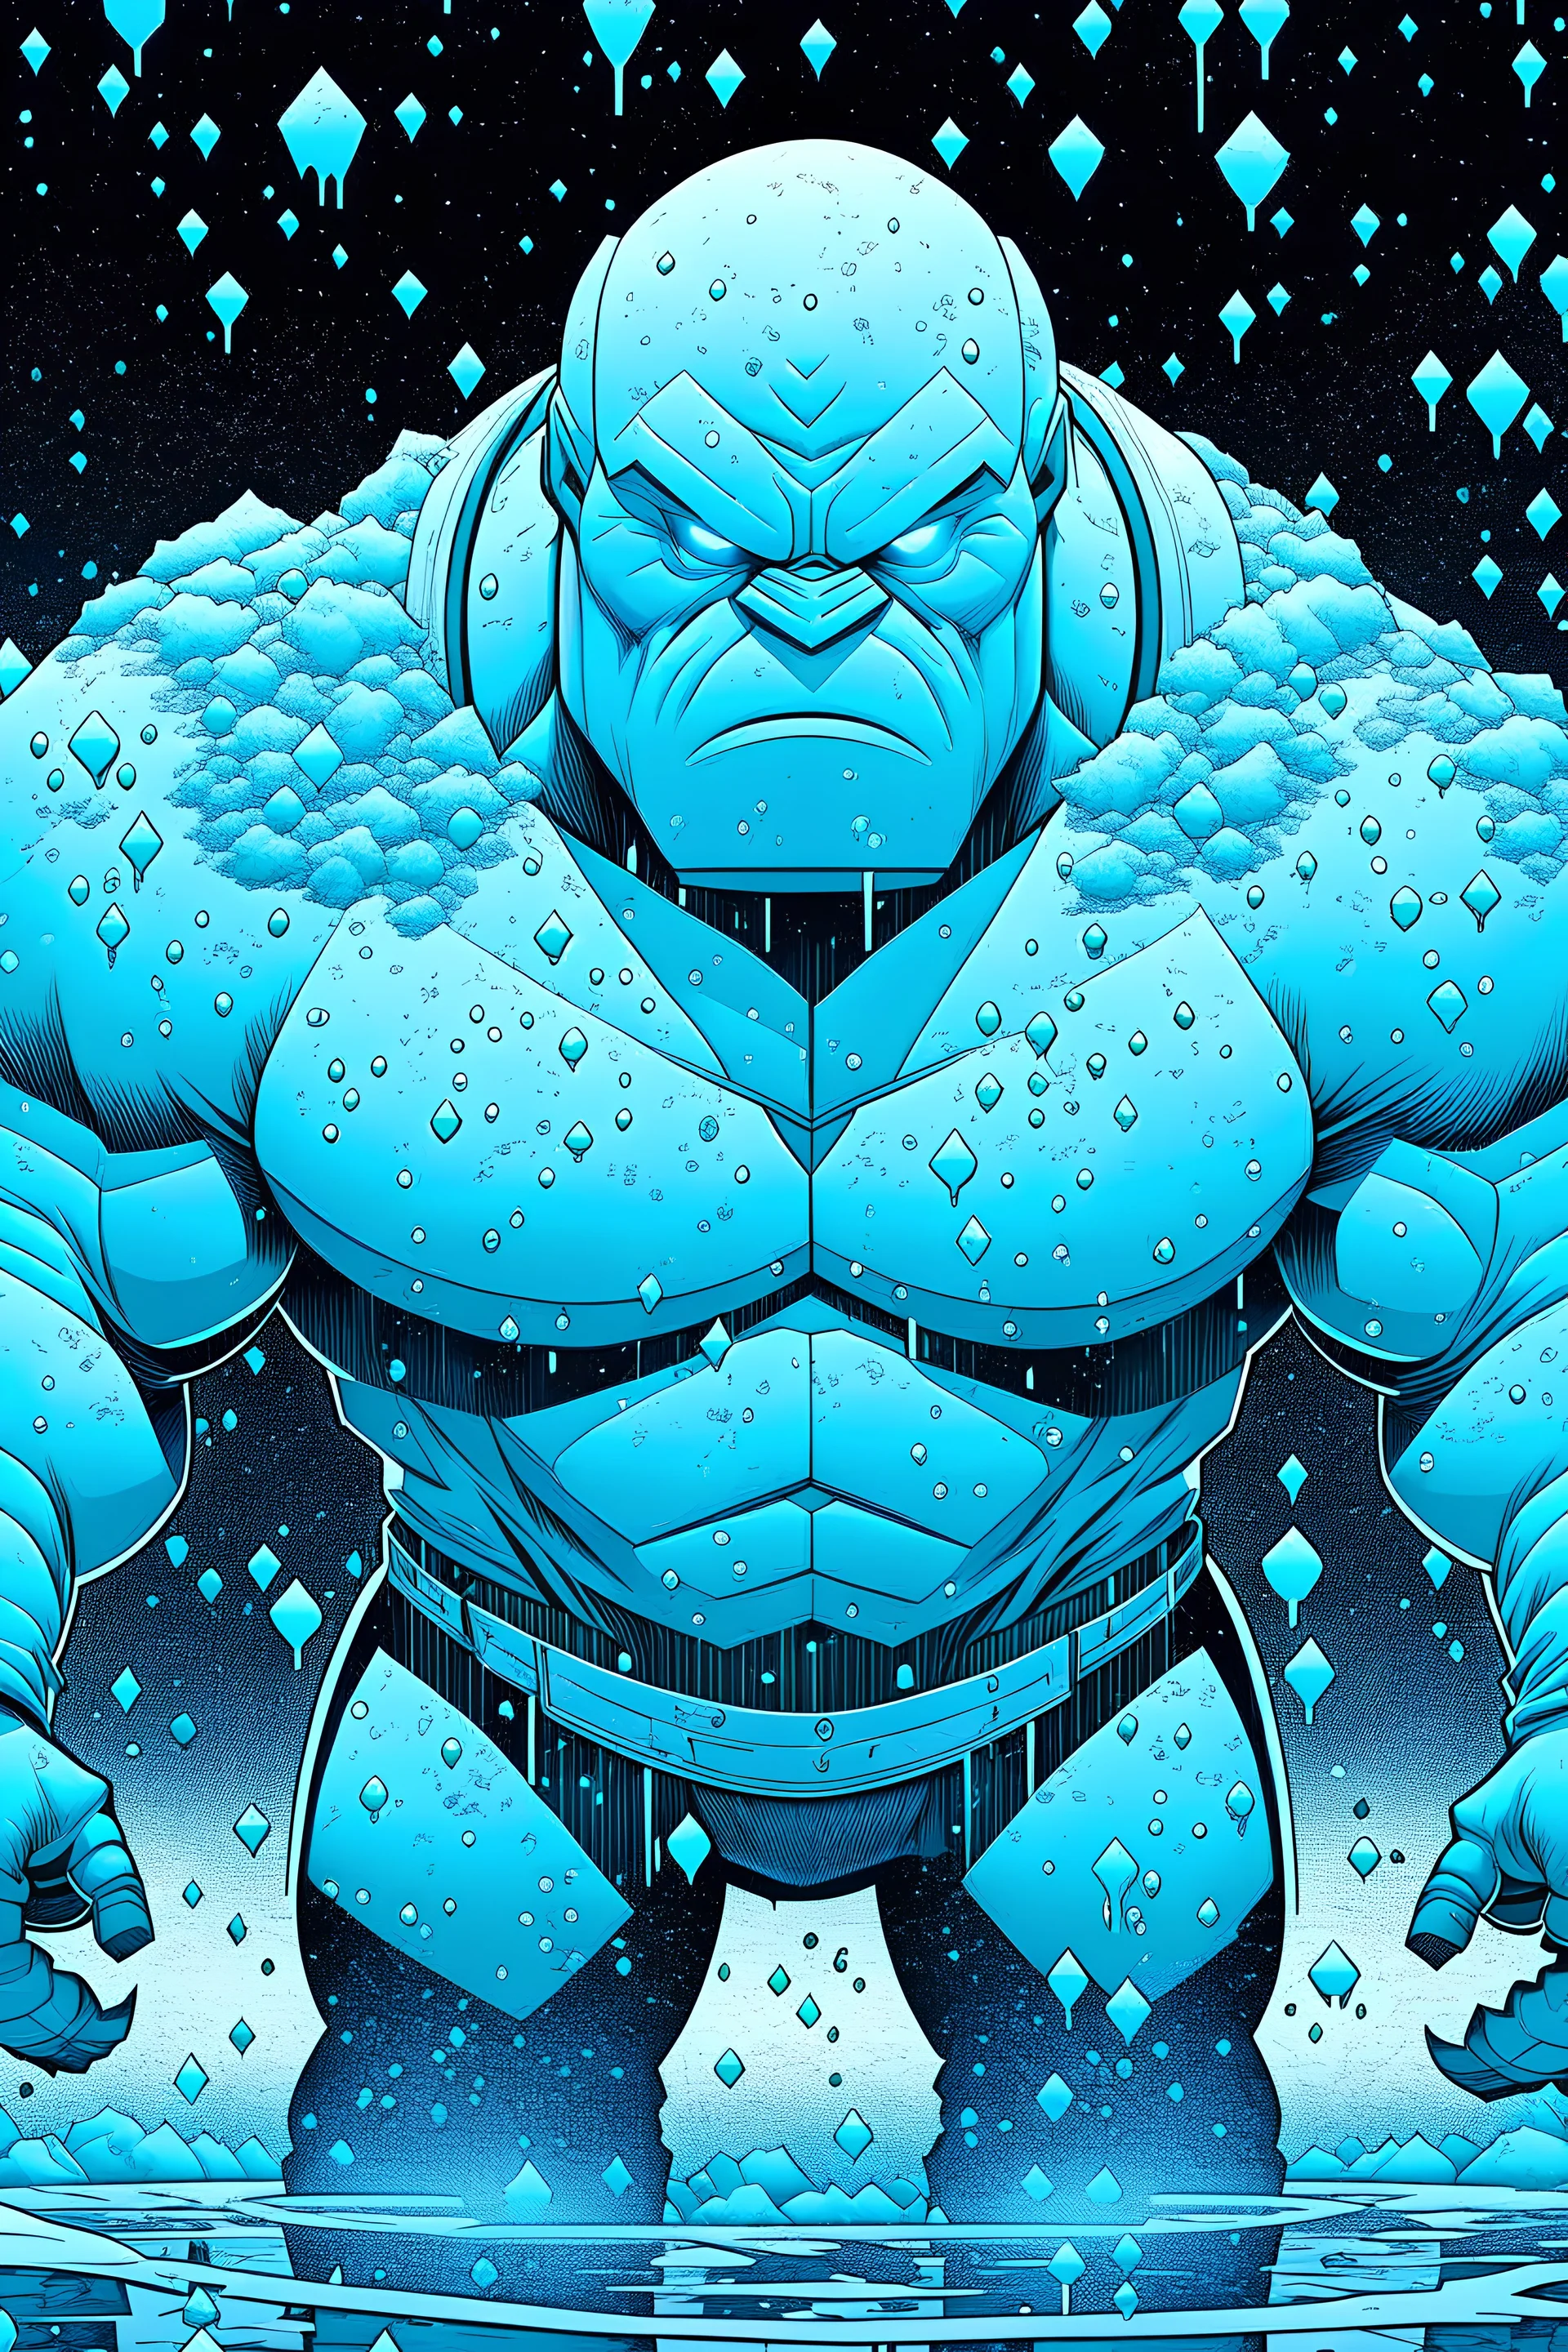 A large golem made of ice. Its eyes are blue. It is surrounded by snow. It is snowing around it. Whole figure. Comic-book style.